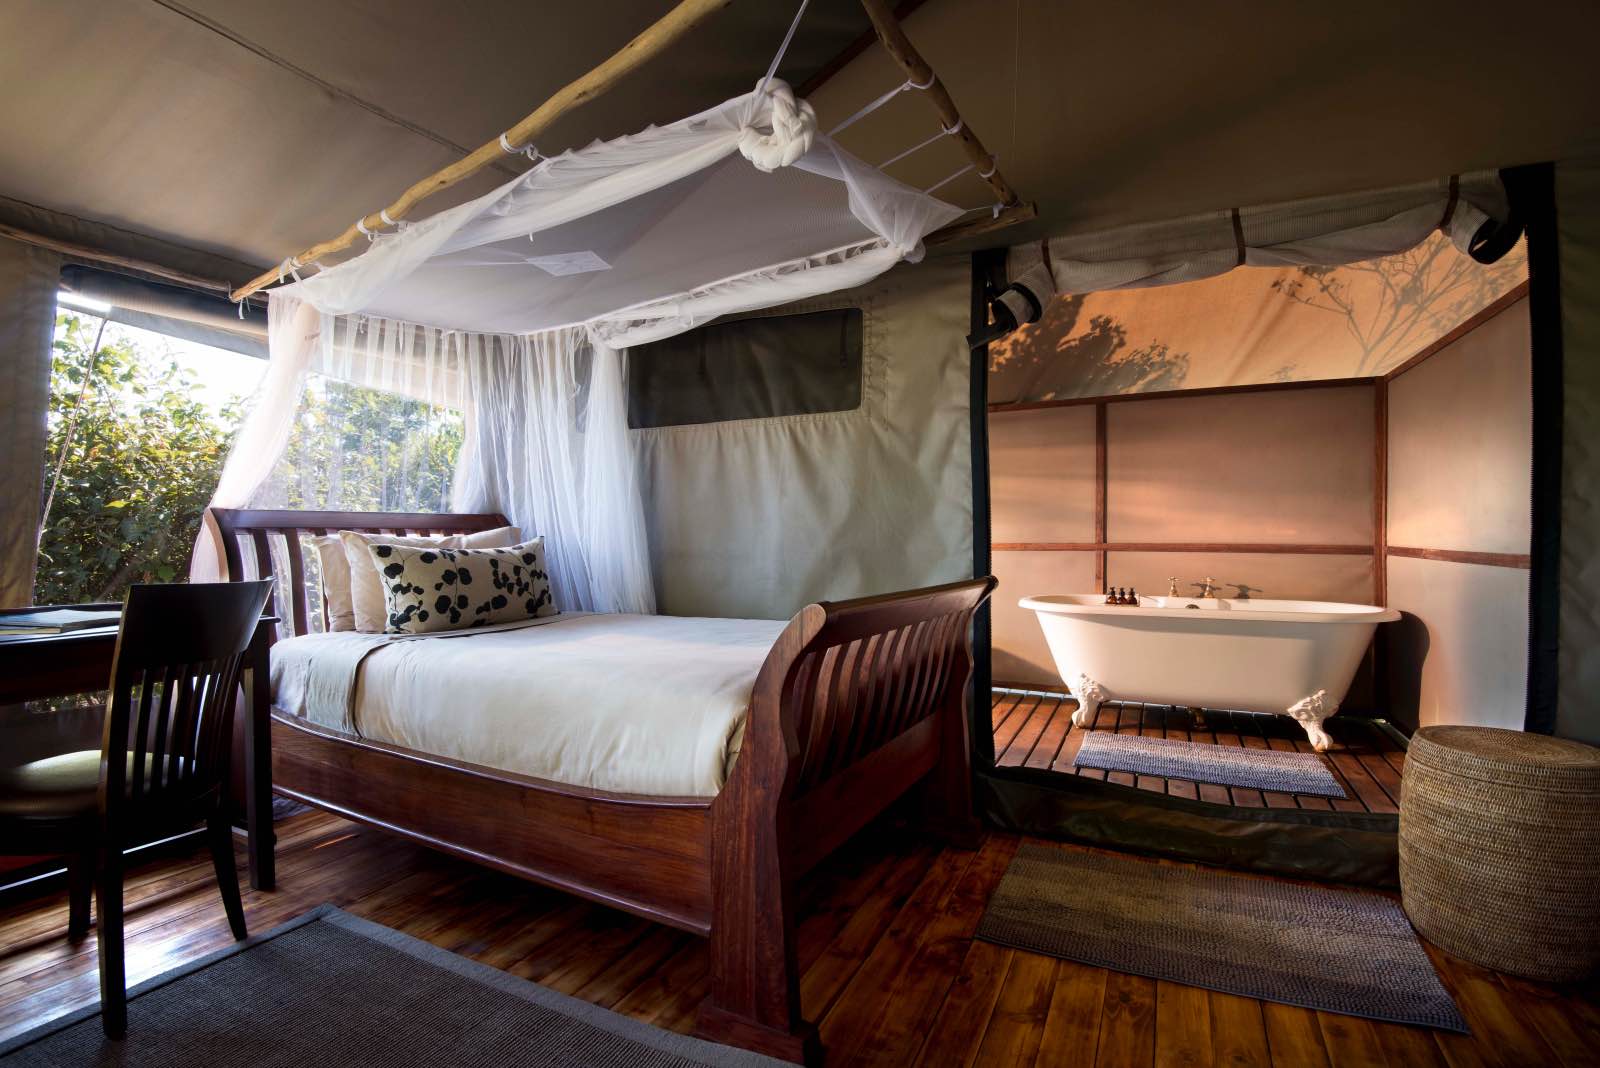 Inside the tented rooms at Linyanti Ebony with wooden floors and bath tubs